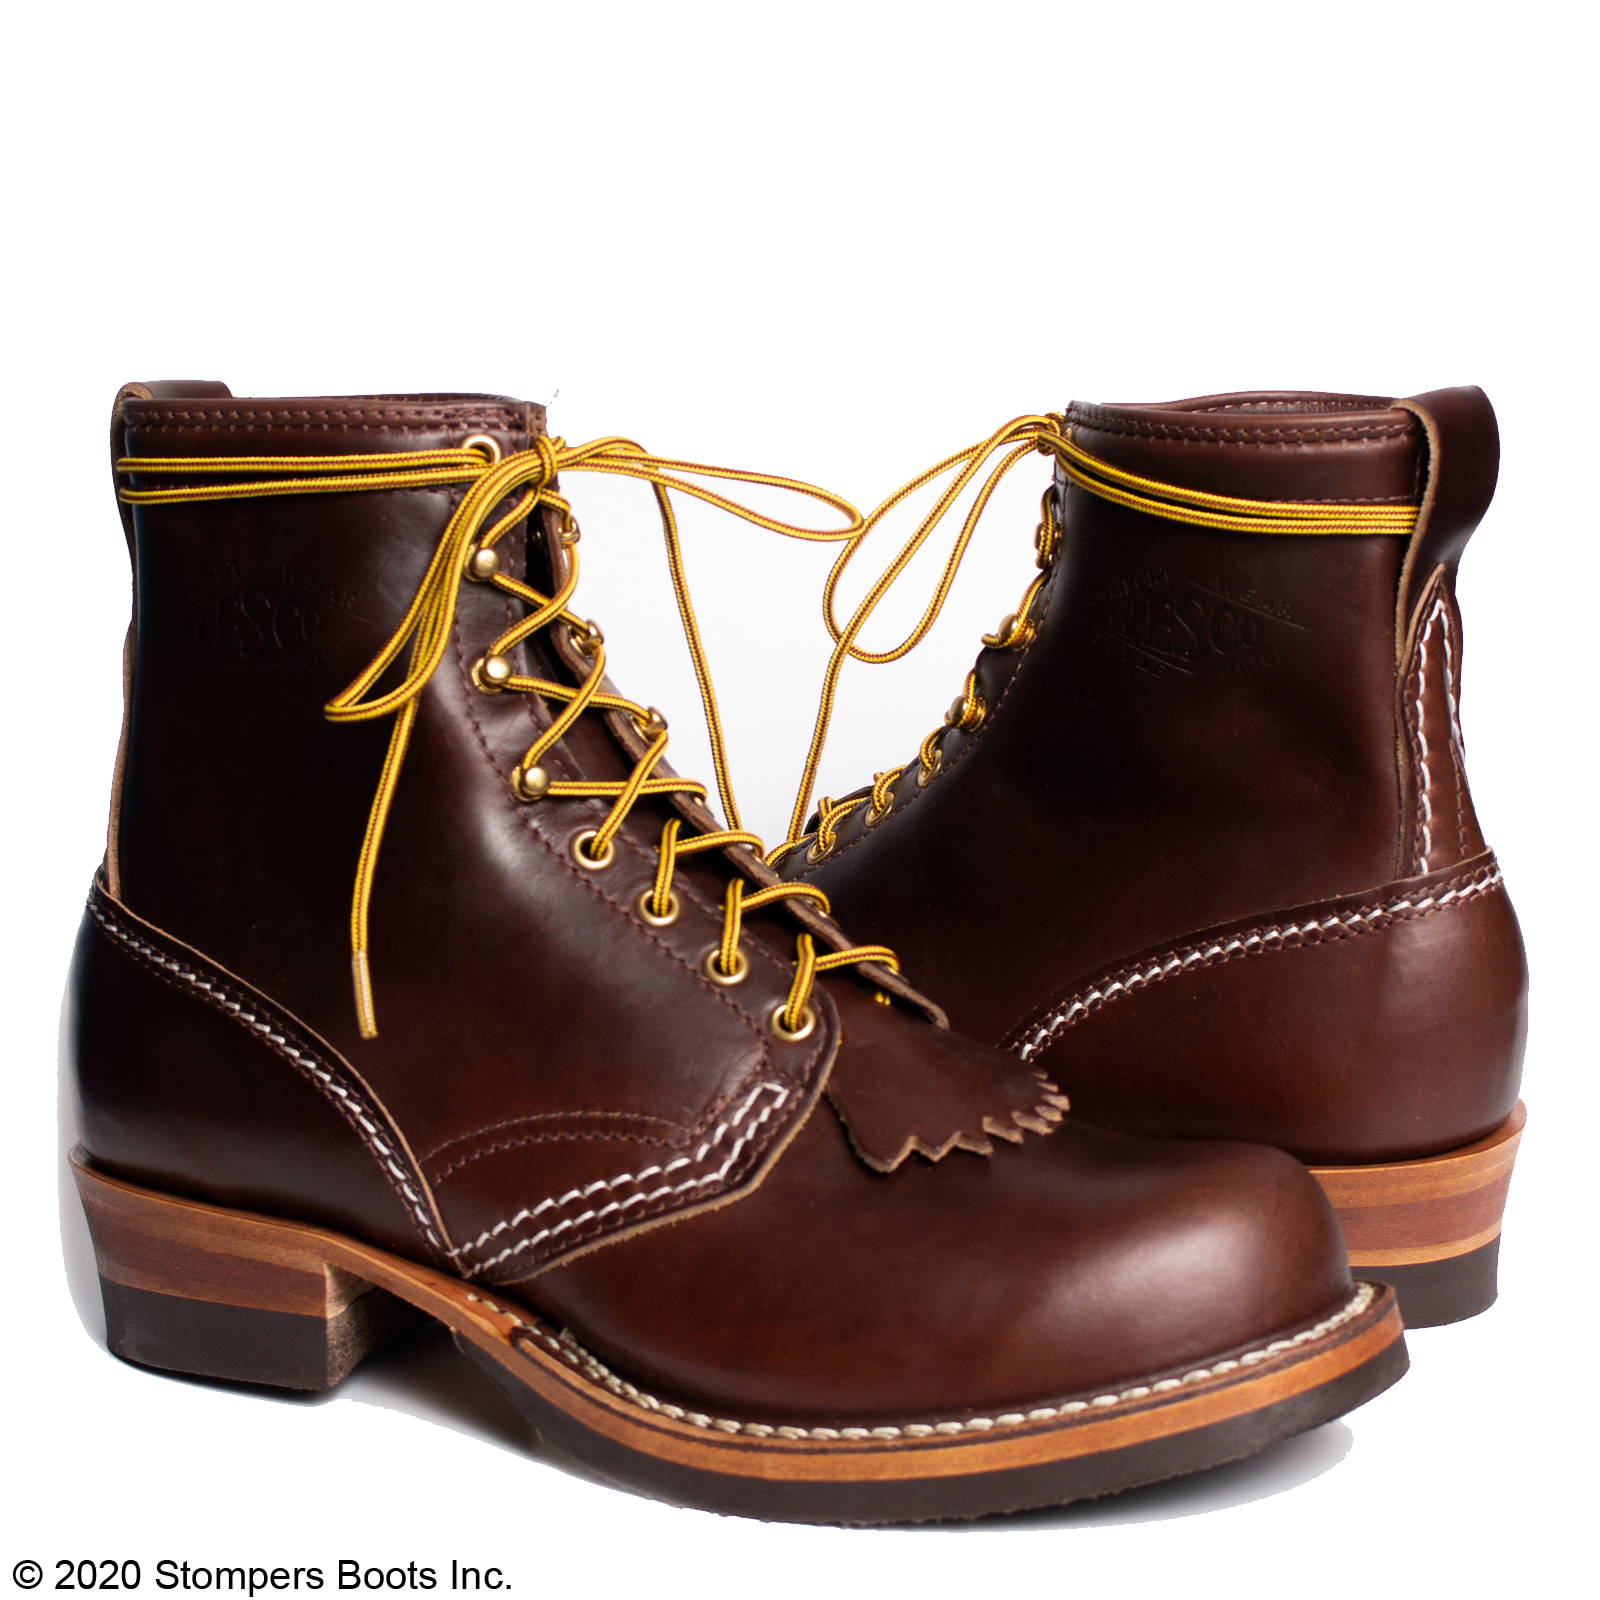 Limited Edition Wesco Jobmaster 8-inch Brown Boots